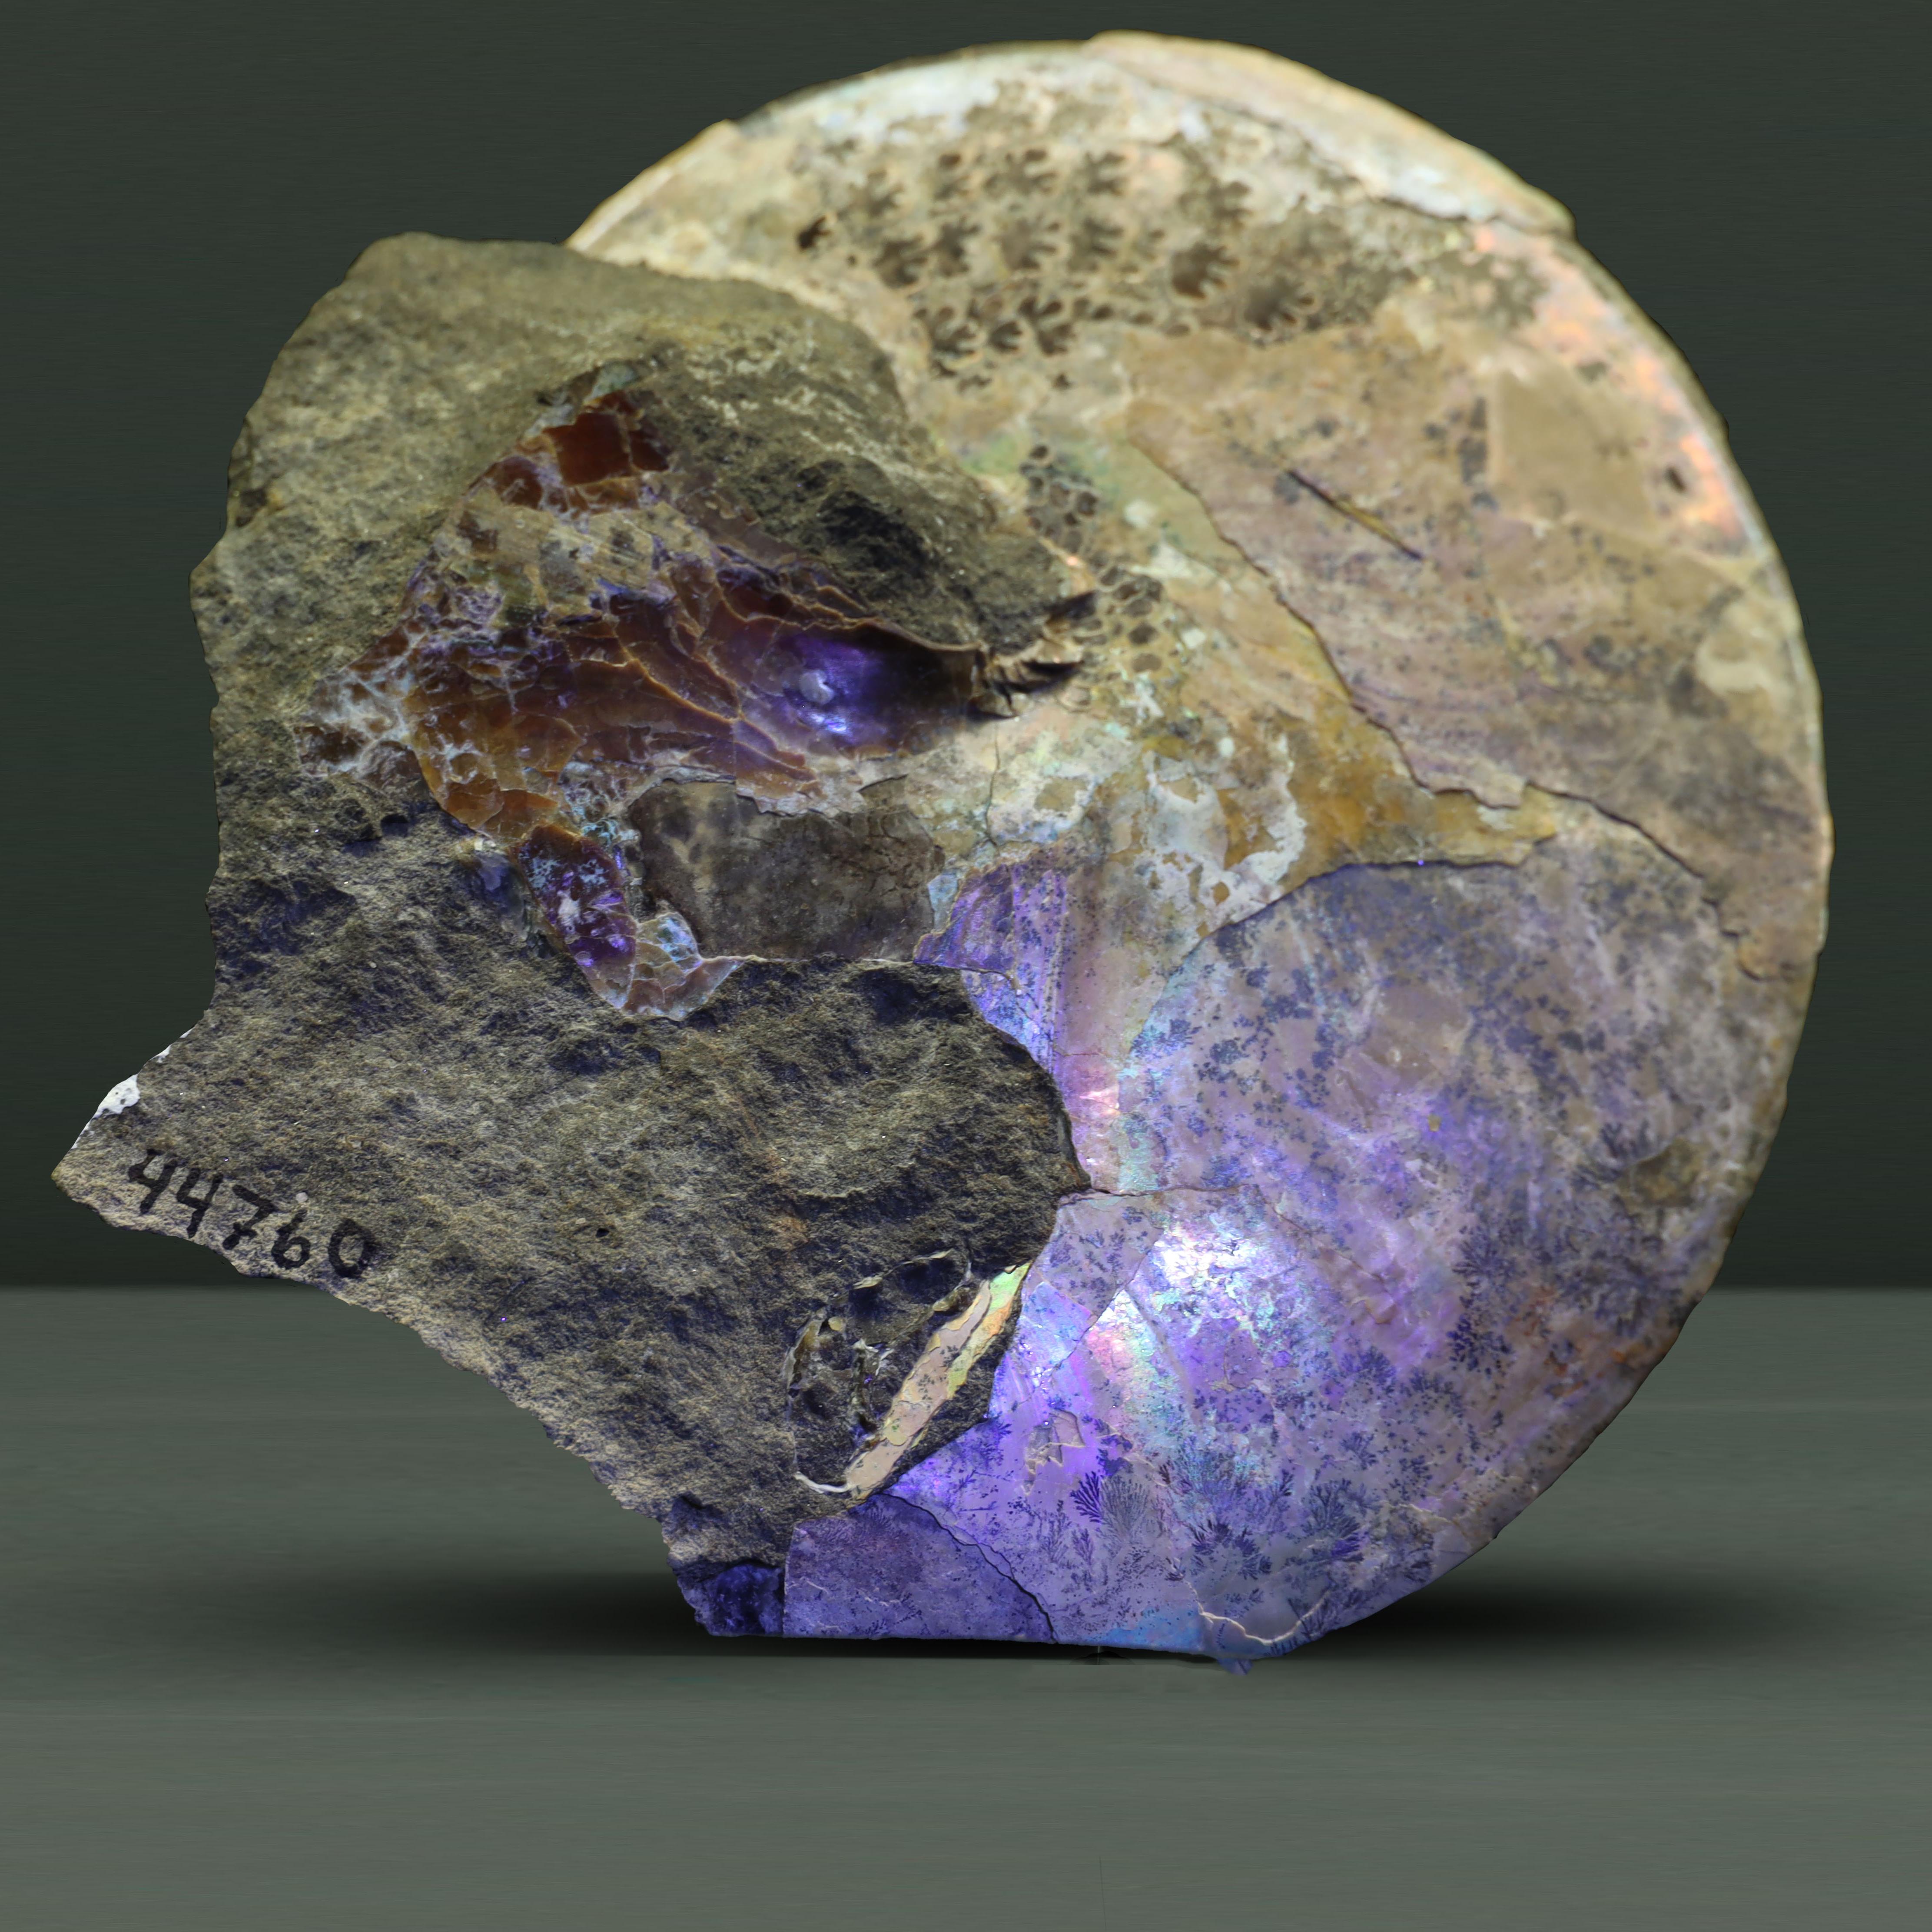 A circular ammonite fossil against a green background with glowing iridescence in its bottom half. 